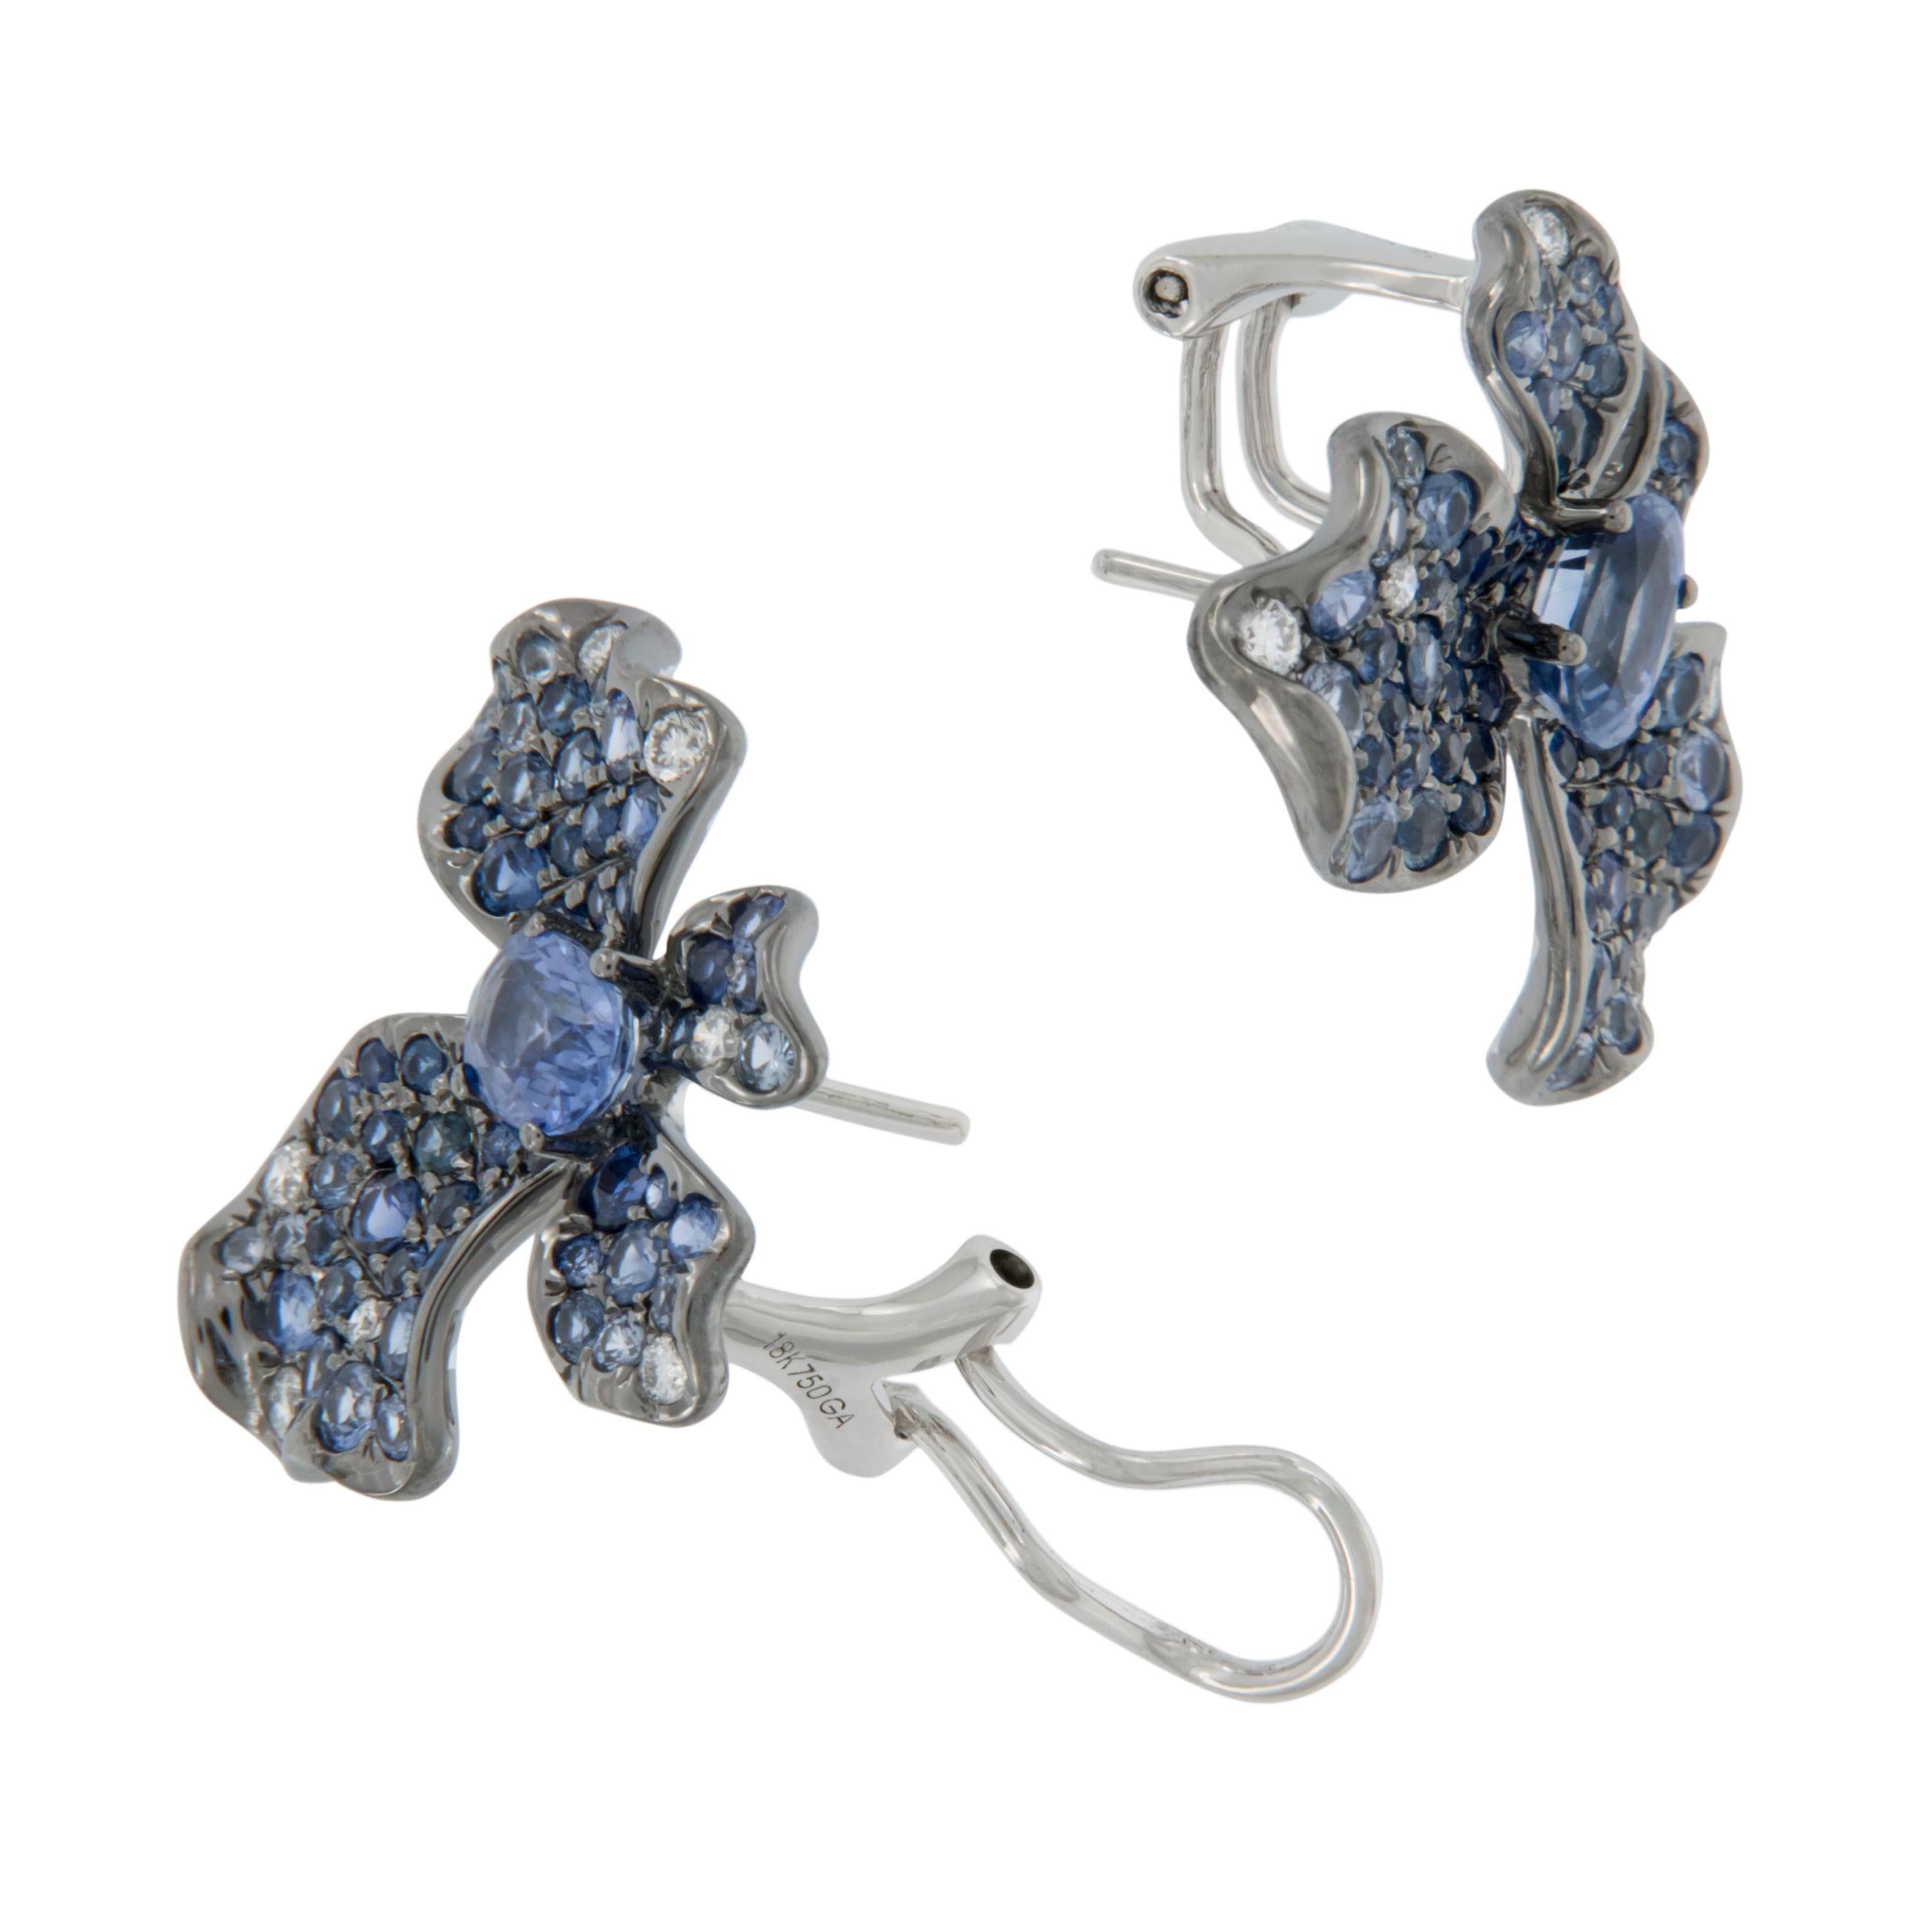 These fluid and ethereal earrings are simply elegant! With 3.61 Cttw various tones of fine blue sapphires accented by 0.22 Cttw white diamonds, you will be elated wearing them. With posts & clip backs for security of wear. Complimentary signature